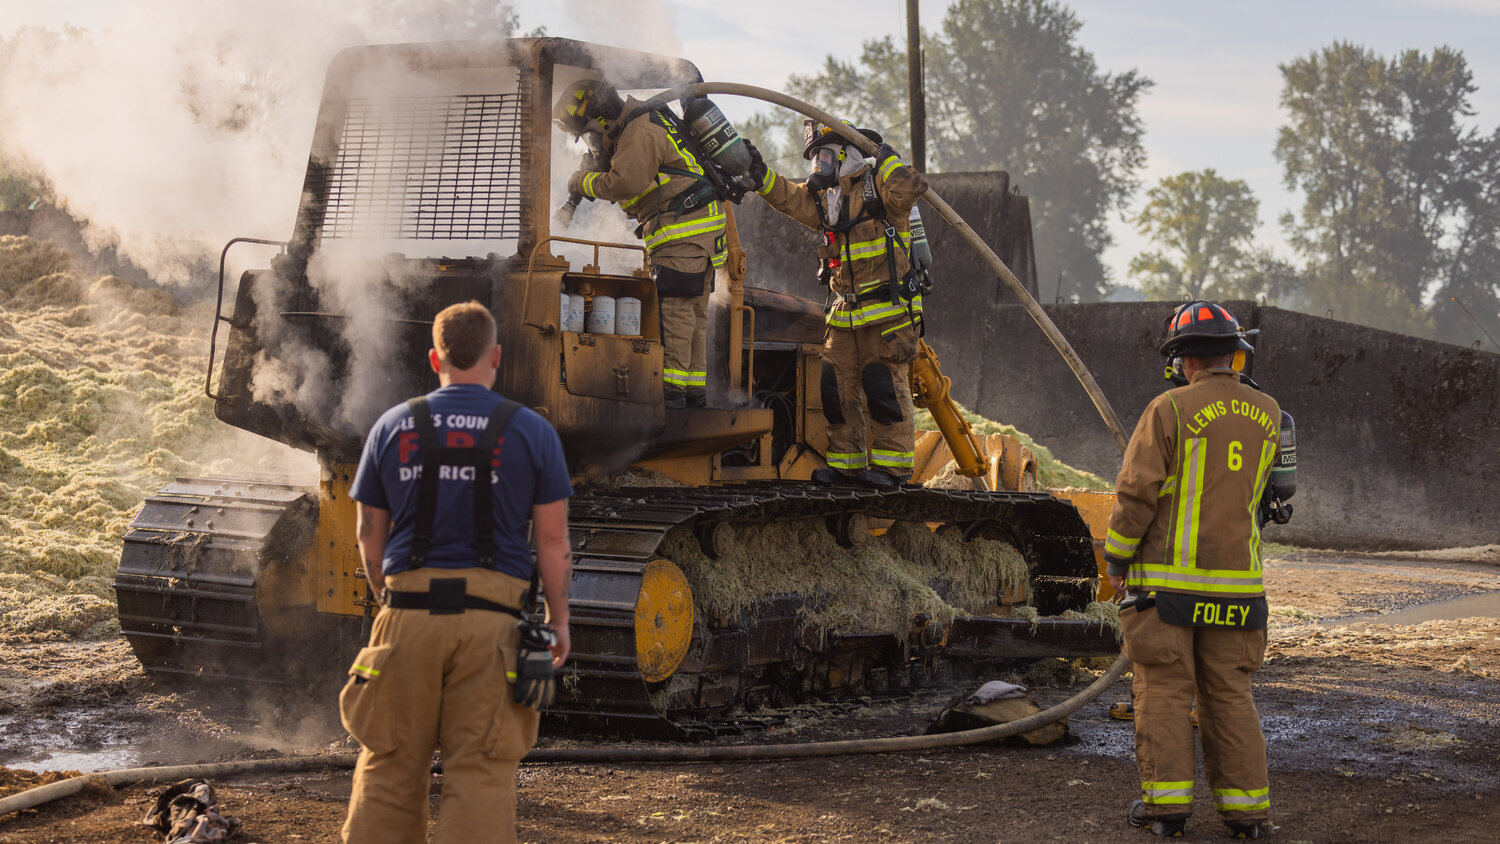 First responders from Lewis County Fire District 6 work to put out a fire inside a piece of machinery at the Osborne Dairy west of Chehalis on Sunday, Sept. 10. Smoke billowed above the area and could be seen from afar Sunday morning. There were no injuries.